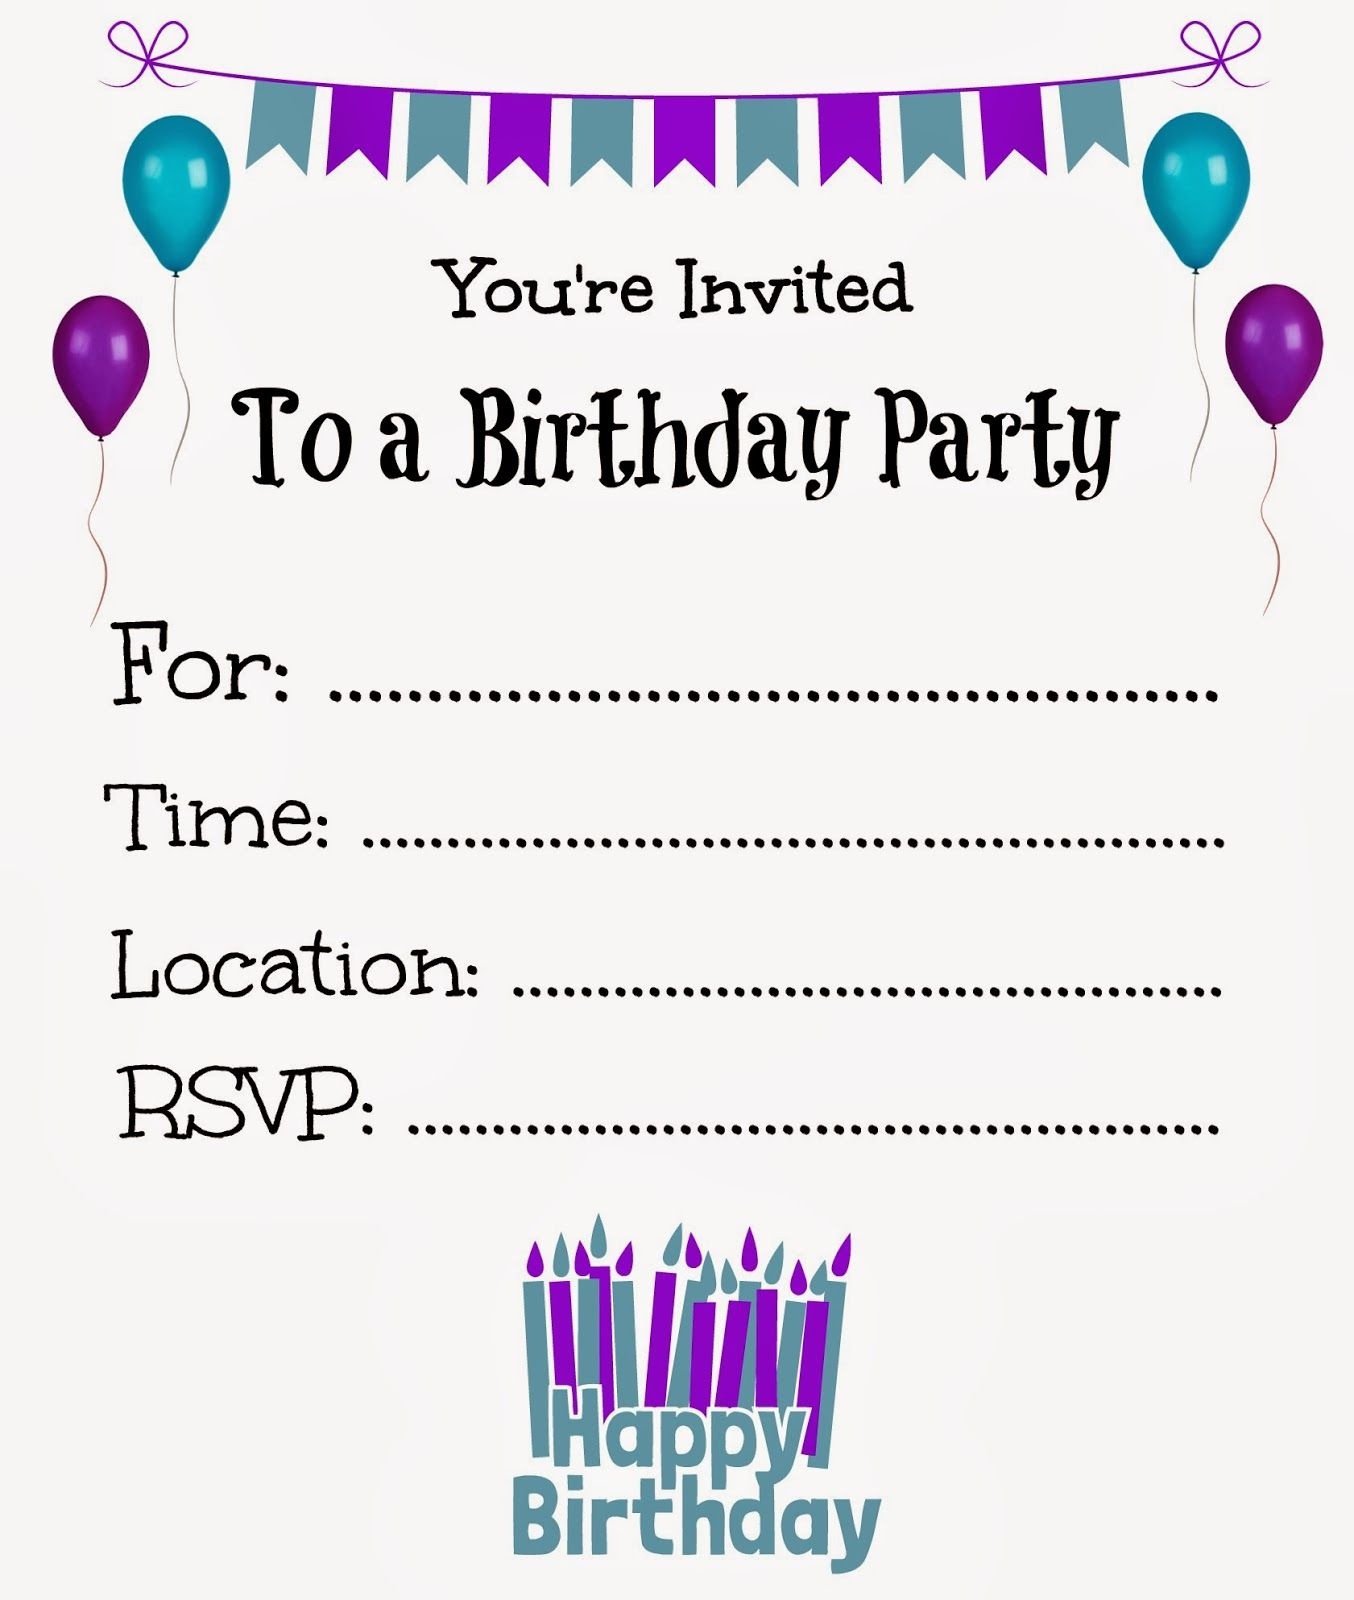 Free Printable Birthday Invitations For Kids #freeprintables - Free Printable Birthday Party Invitations With Photo